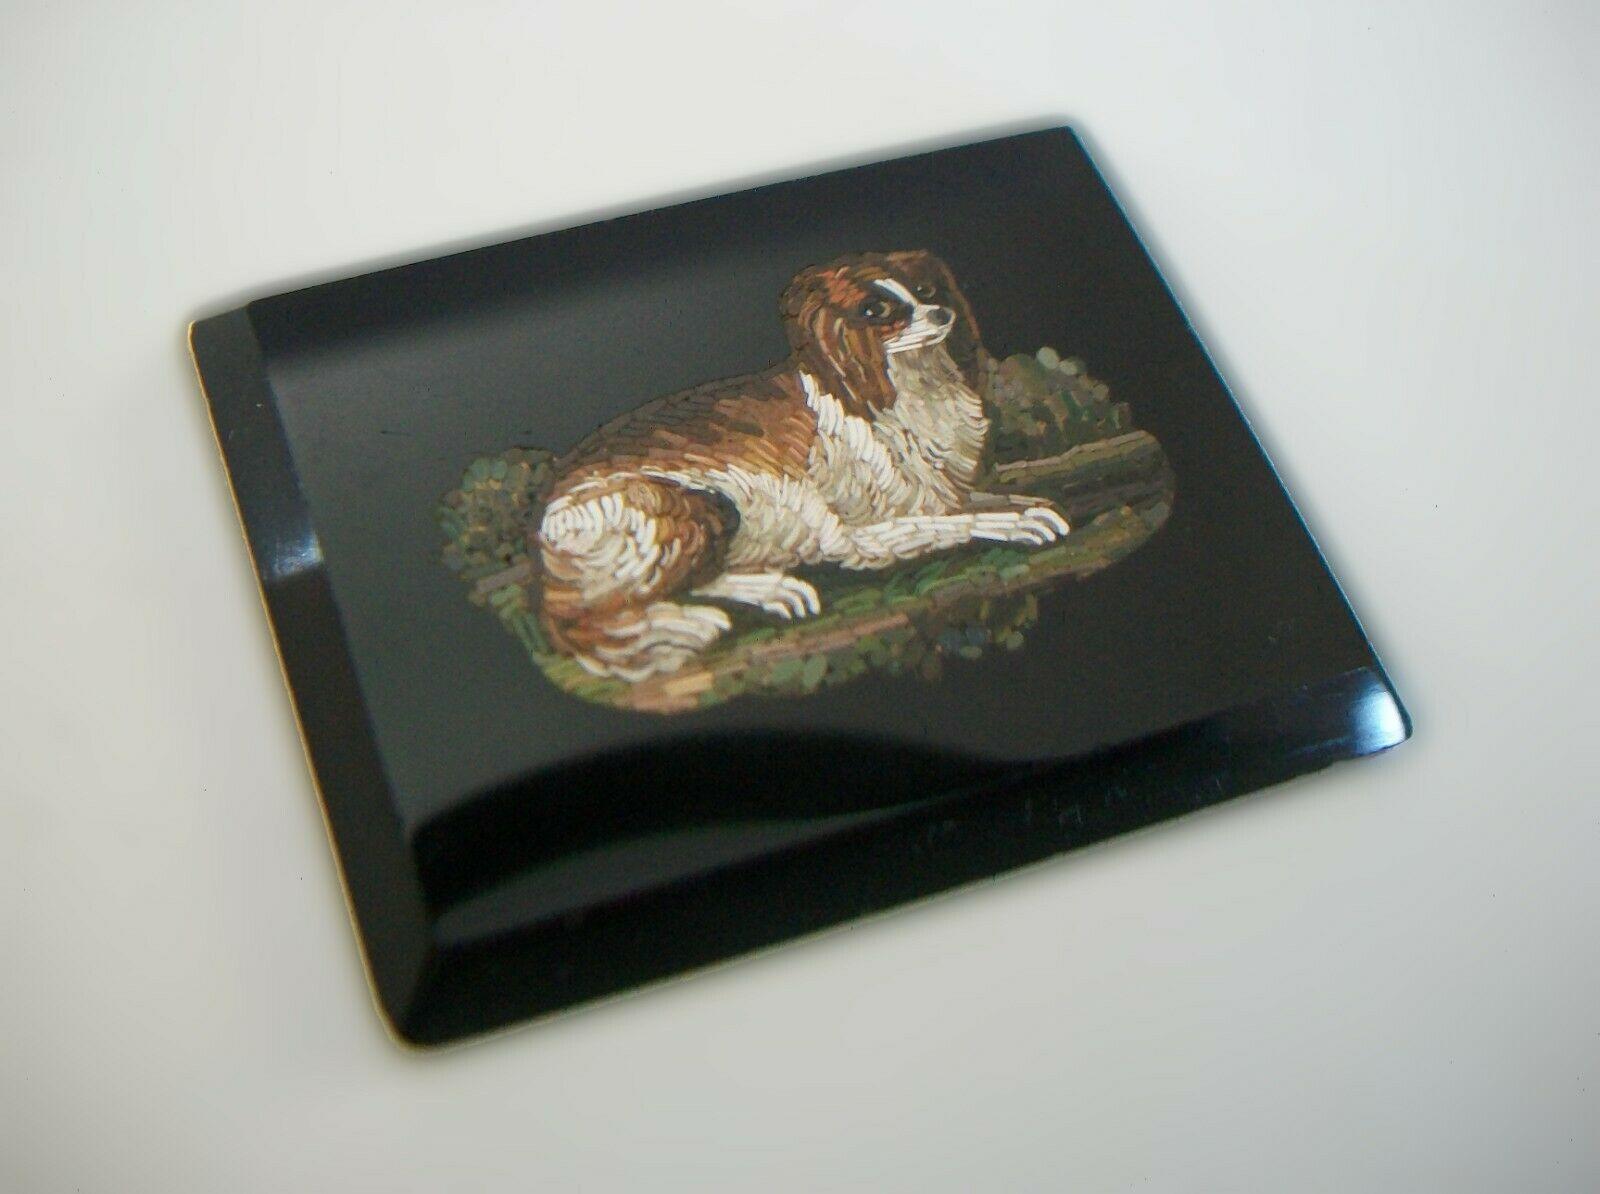 Glass Antique Grand Tour 'King Charles Spaniel' Micro Mosaic Plaque, Italy, C.1850 For Sale